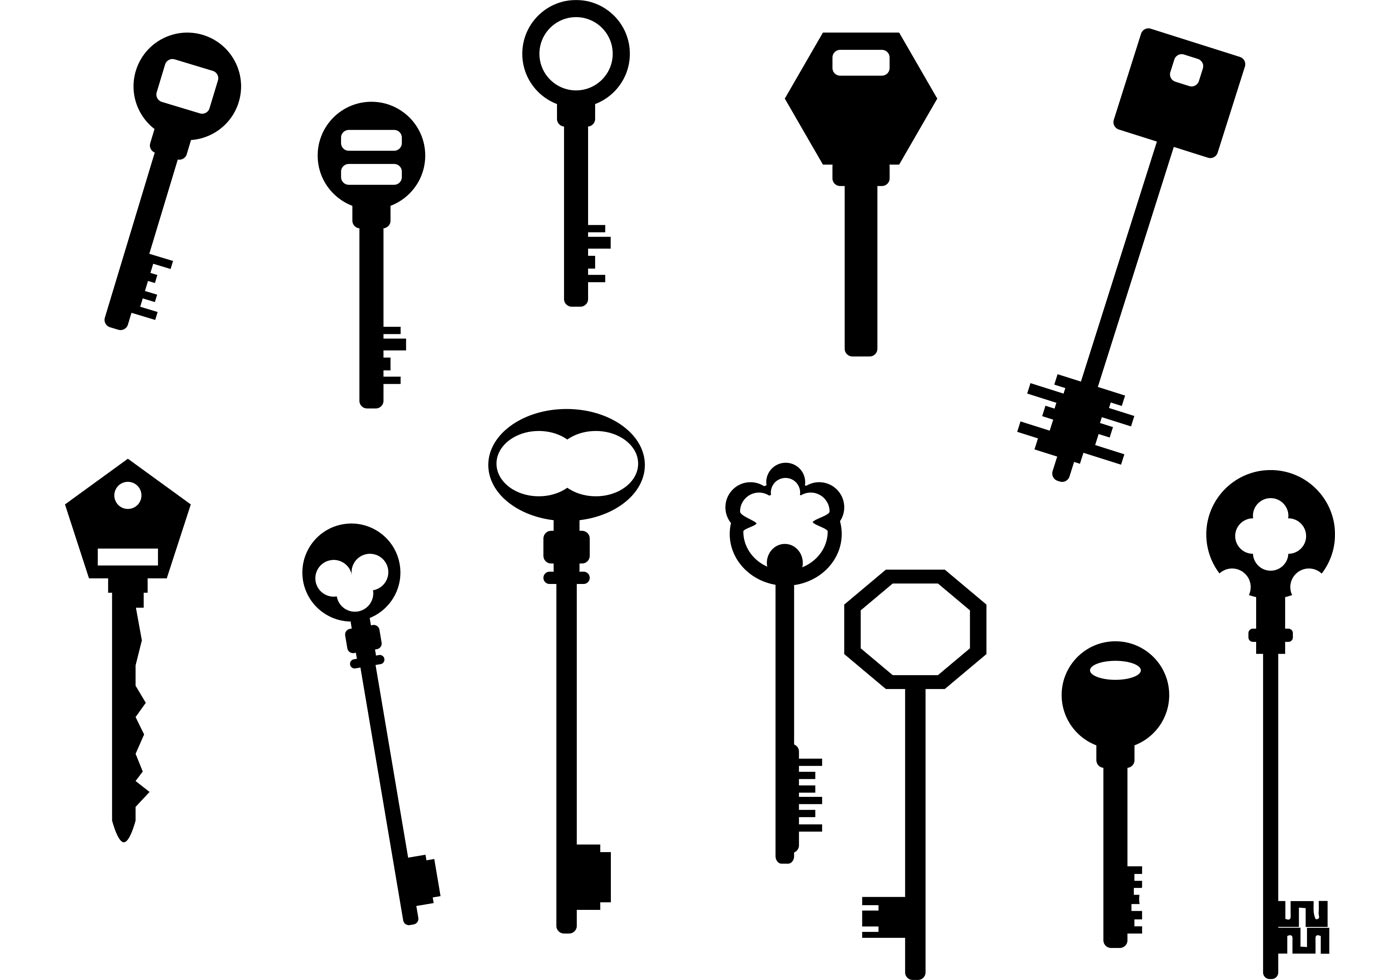 Download Keys silhouette - Download Free Vector Art, Stock Graphics & Images